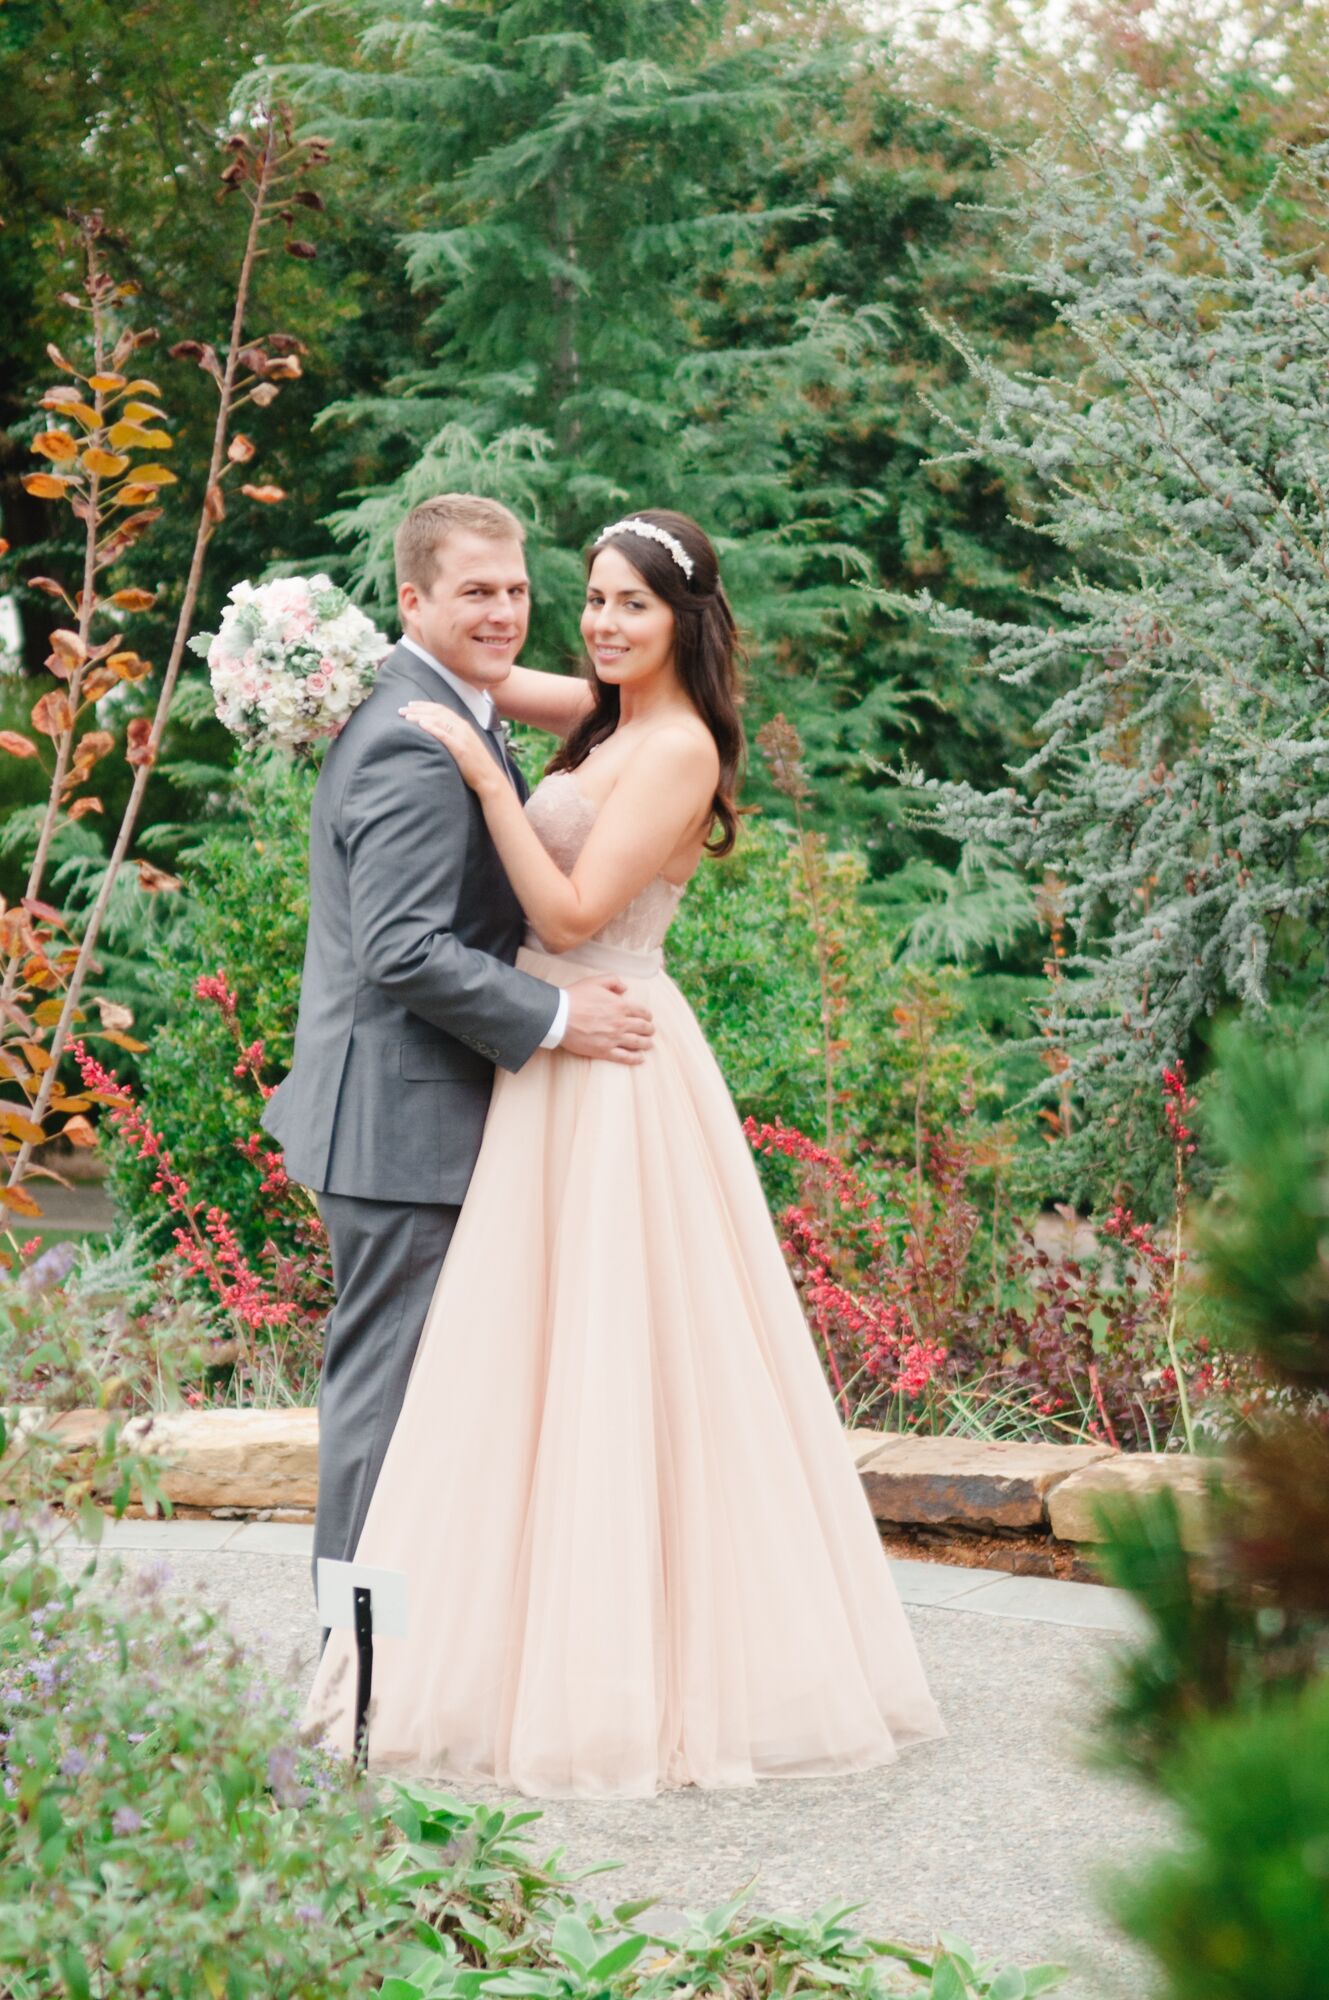 An Intimate Garden Wedding  at Alex Camp House at the 